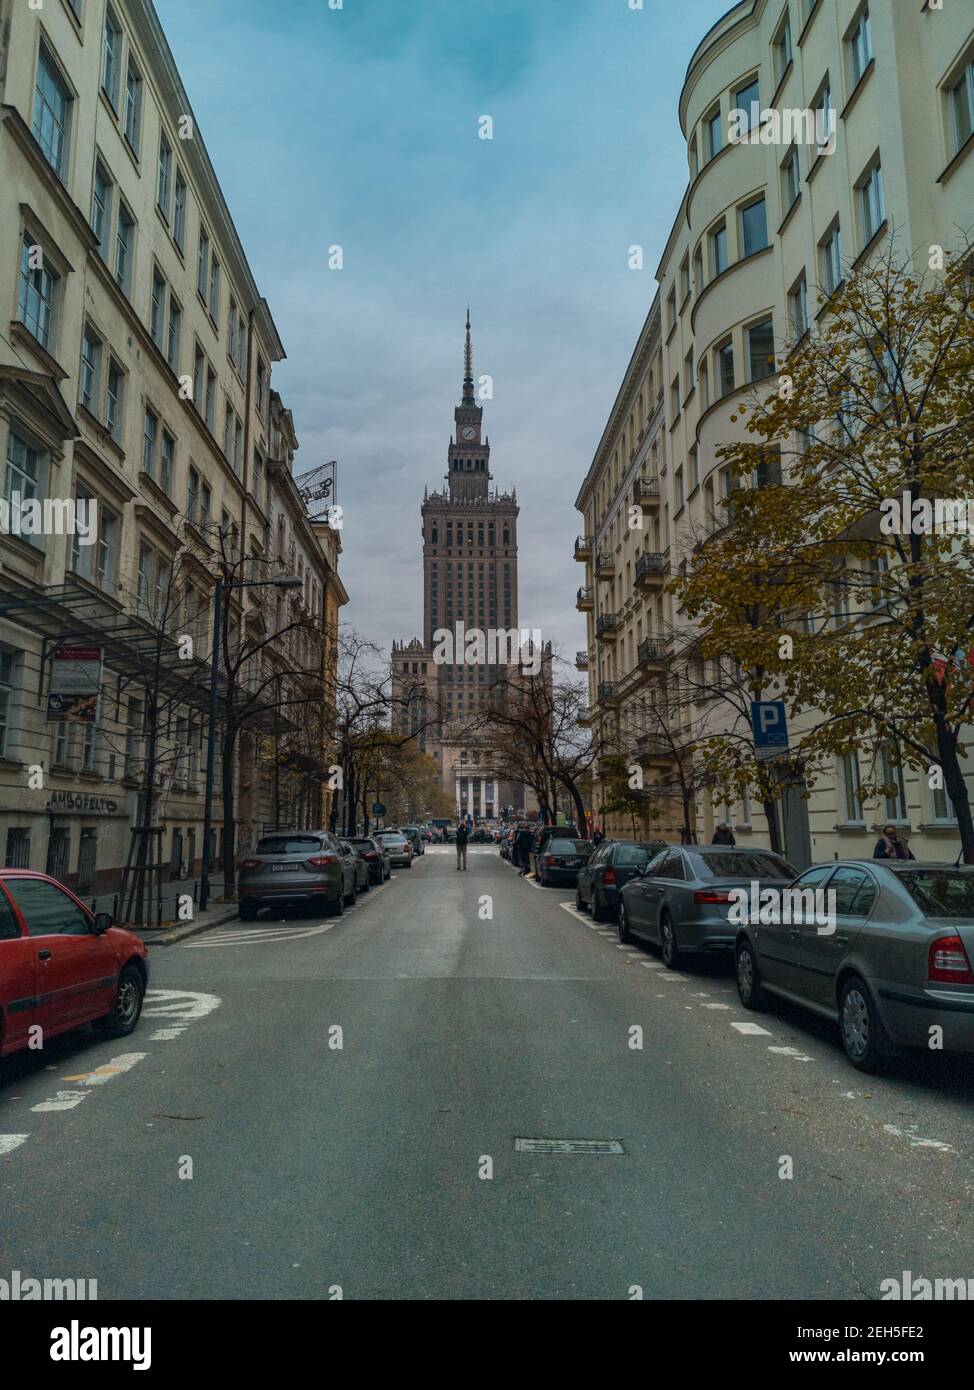 Warsaw November 10 2019 Palace of Culture and Science at end of street and standing man between two long tenement houses Stock Photo